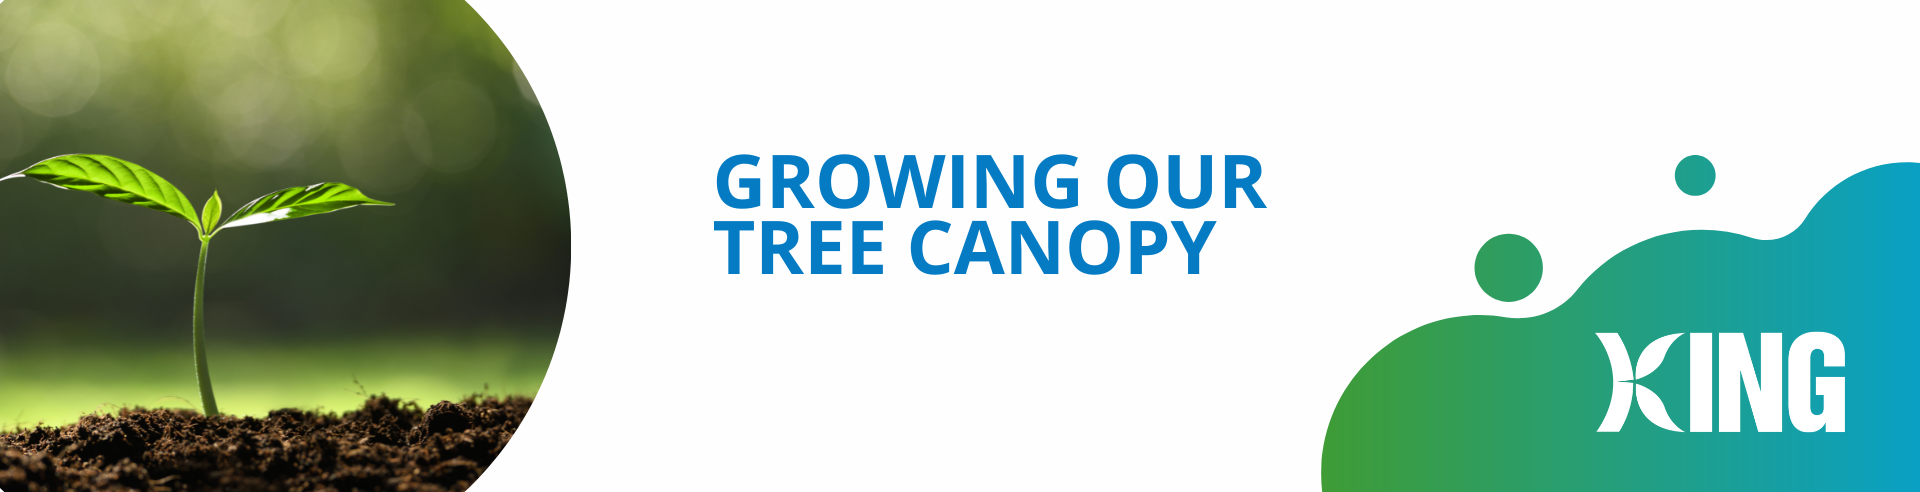 Growing our Tree Canopy